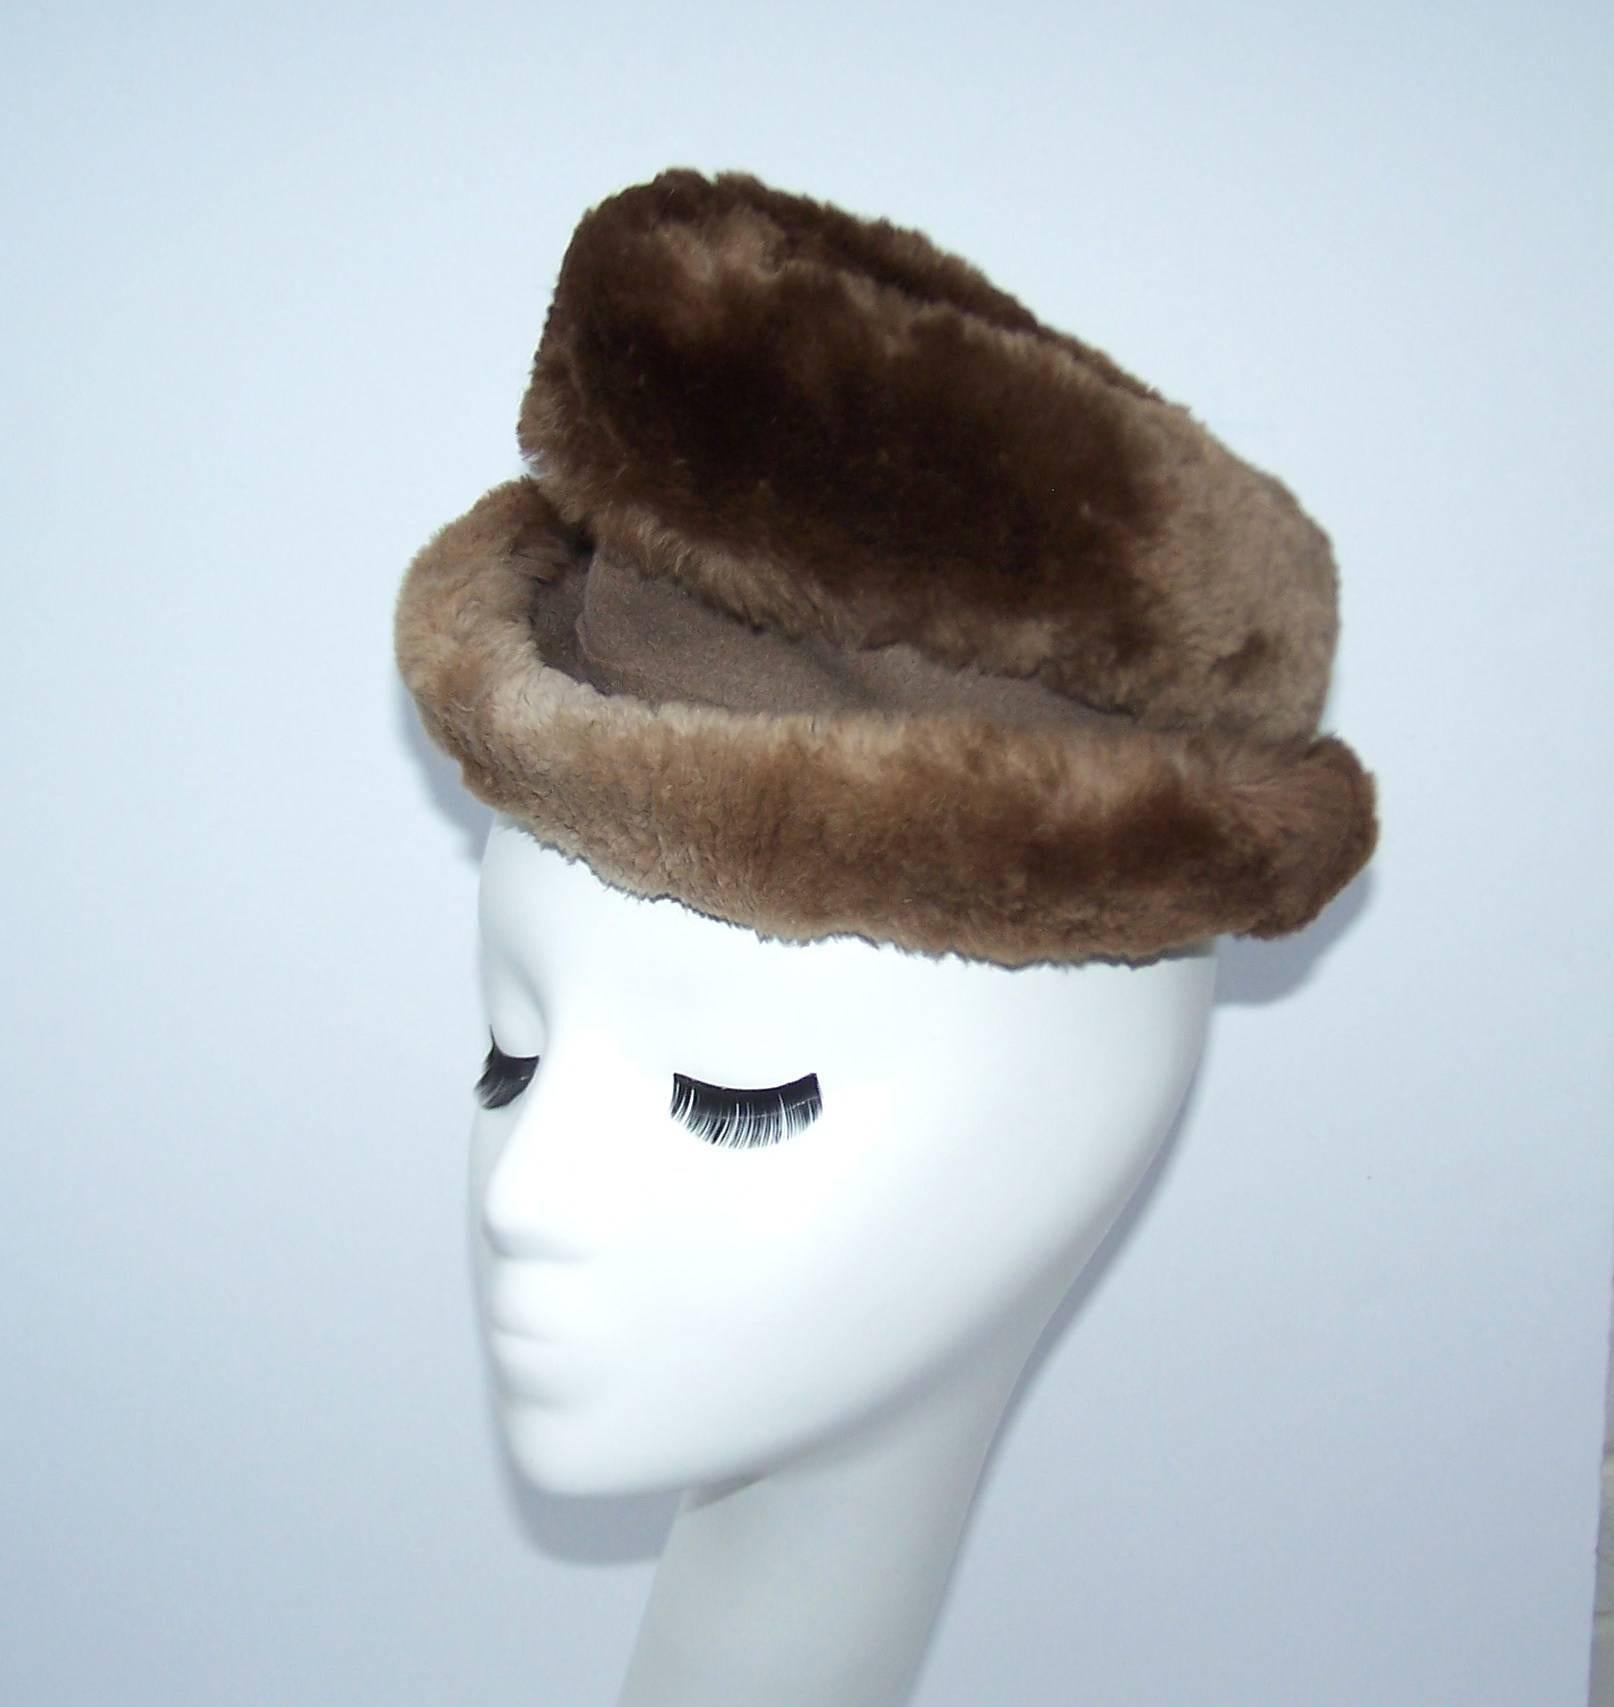 Soft and stylish ... this Rose Kraysler hat from the 1940's is so fun to play with.  The body is made from a neutral mousey brown wool felt and trimmed in sheared beaver fur creating texture and volume.  The pointed crown is exaggerated and looks